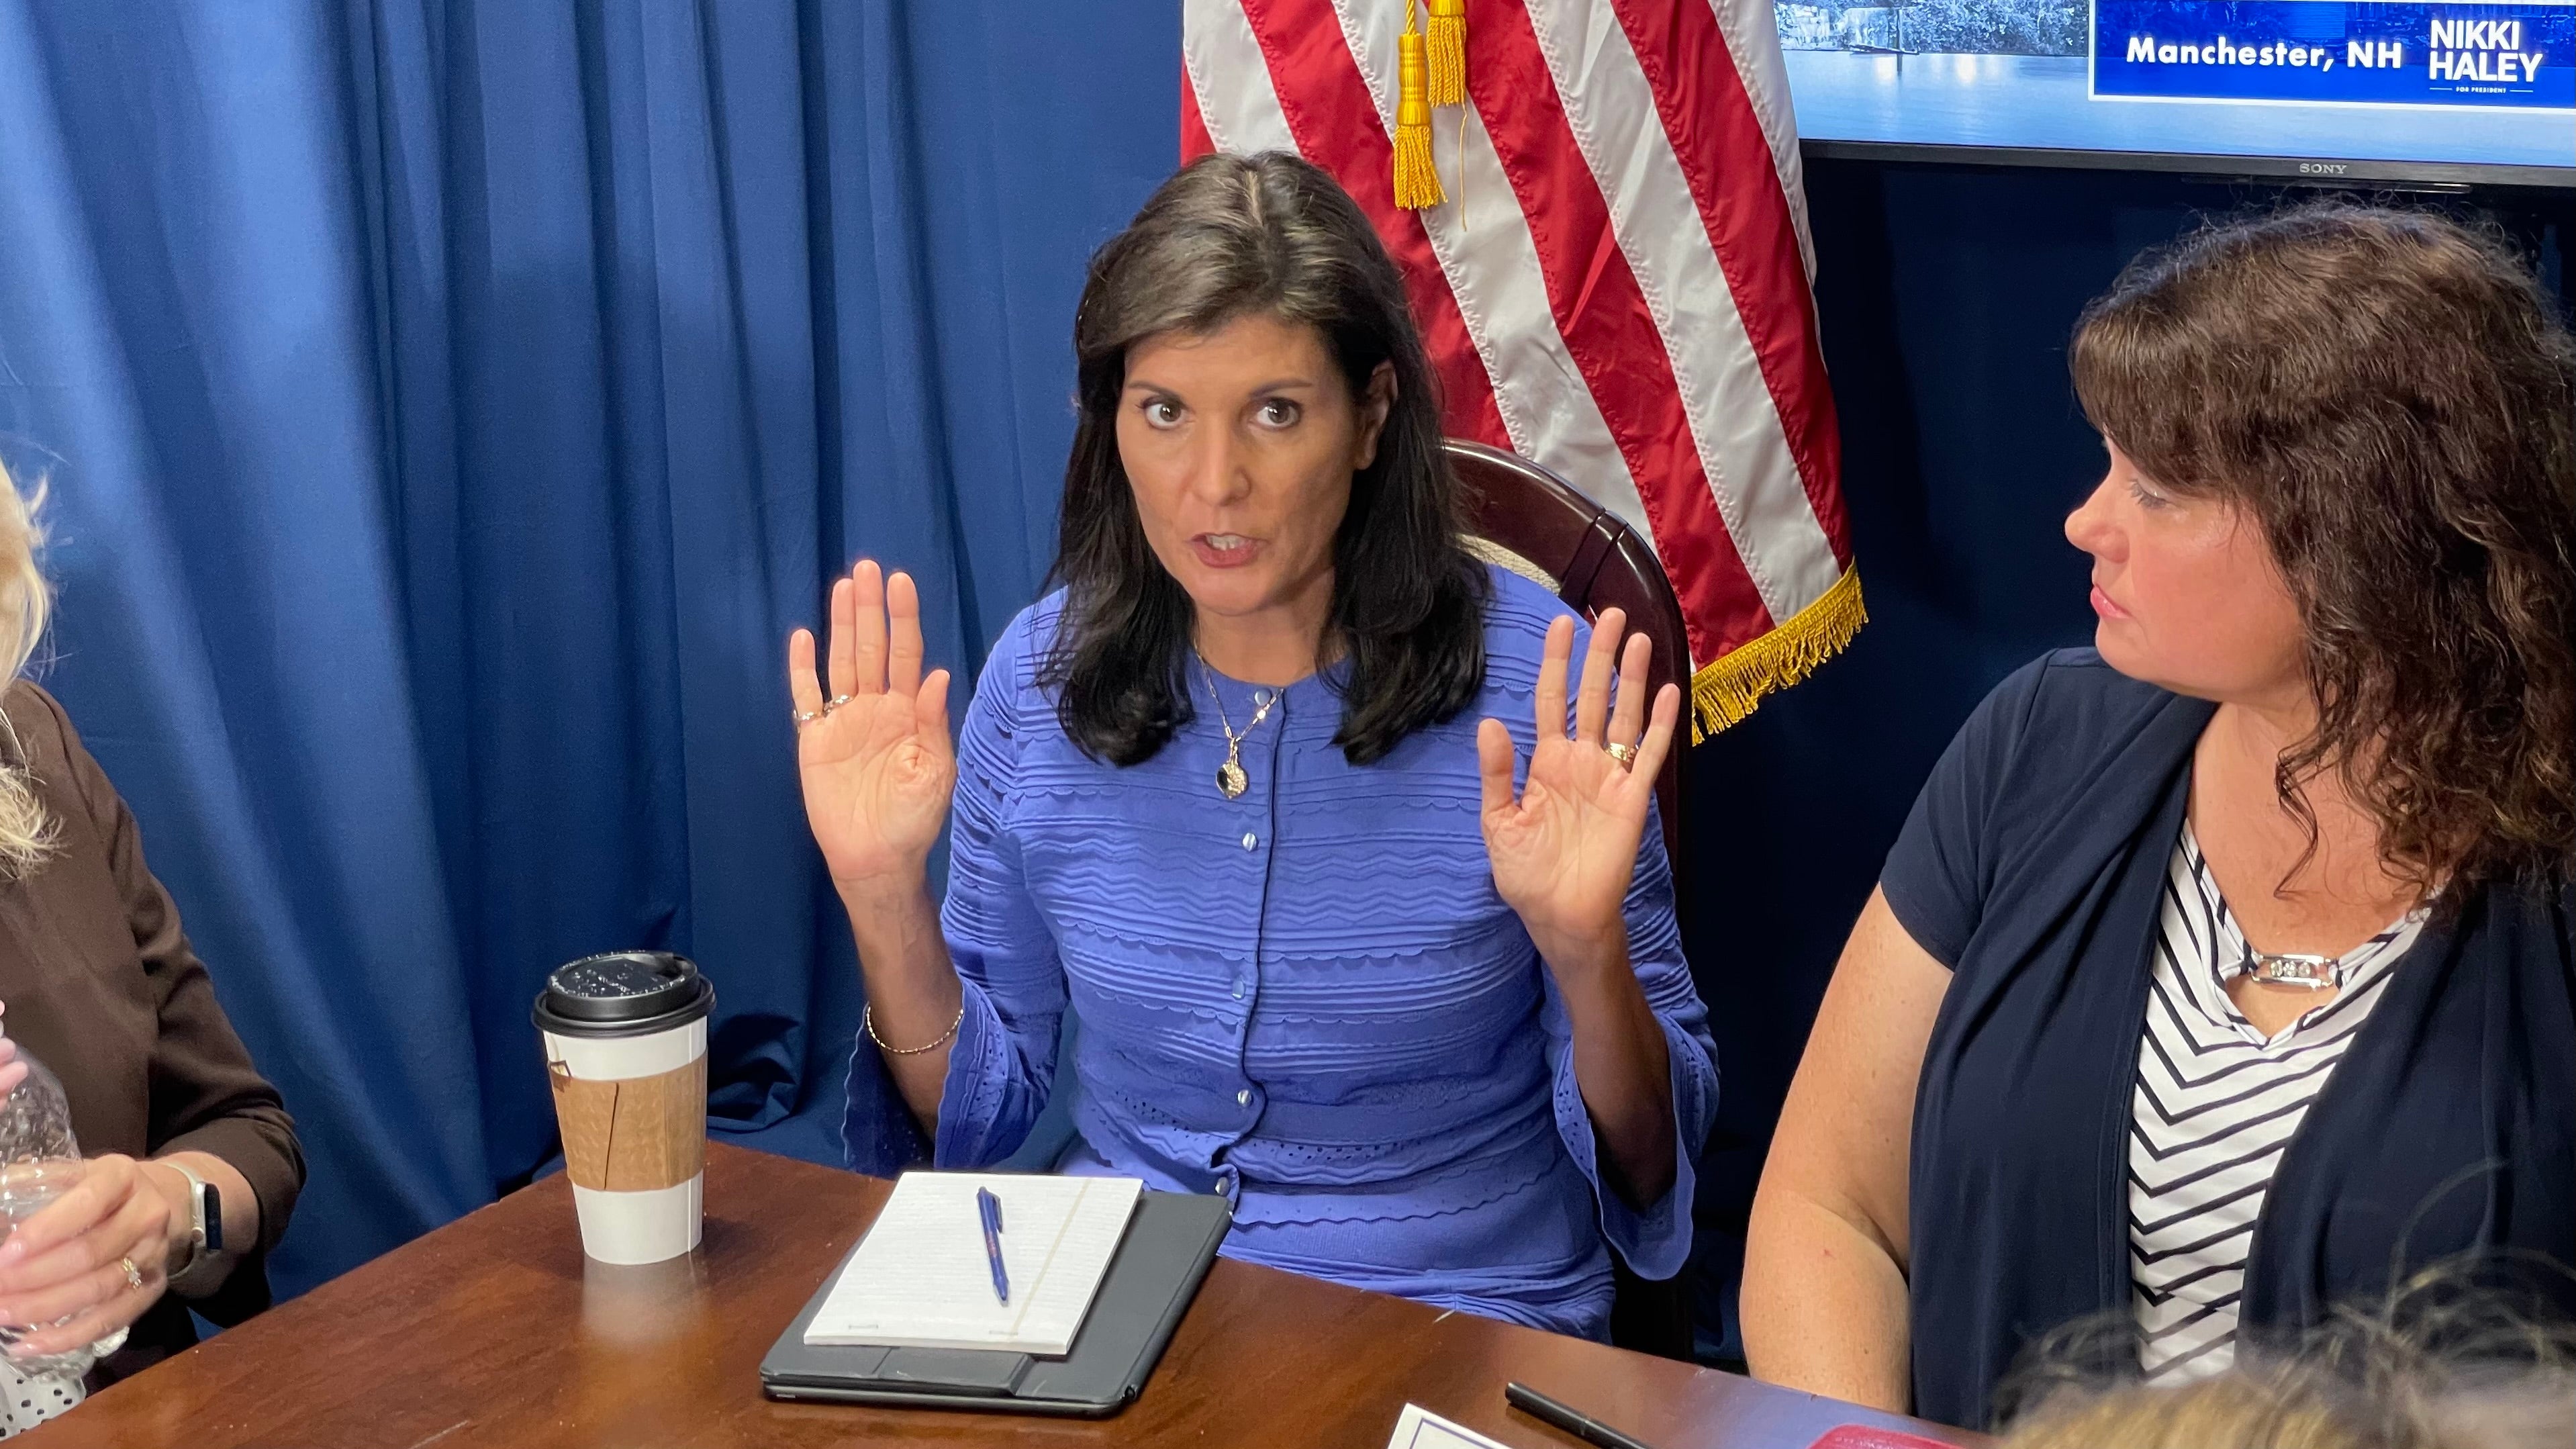 Nikki Haley takes aim at China while spotlighting her opioid crisis plans